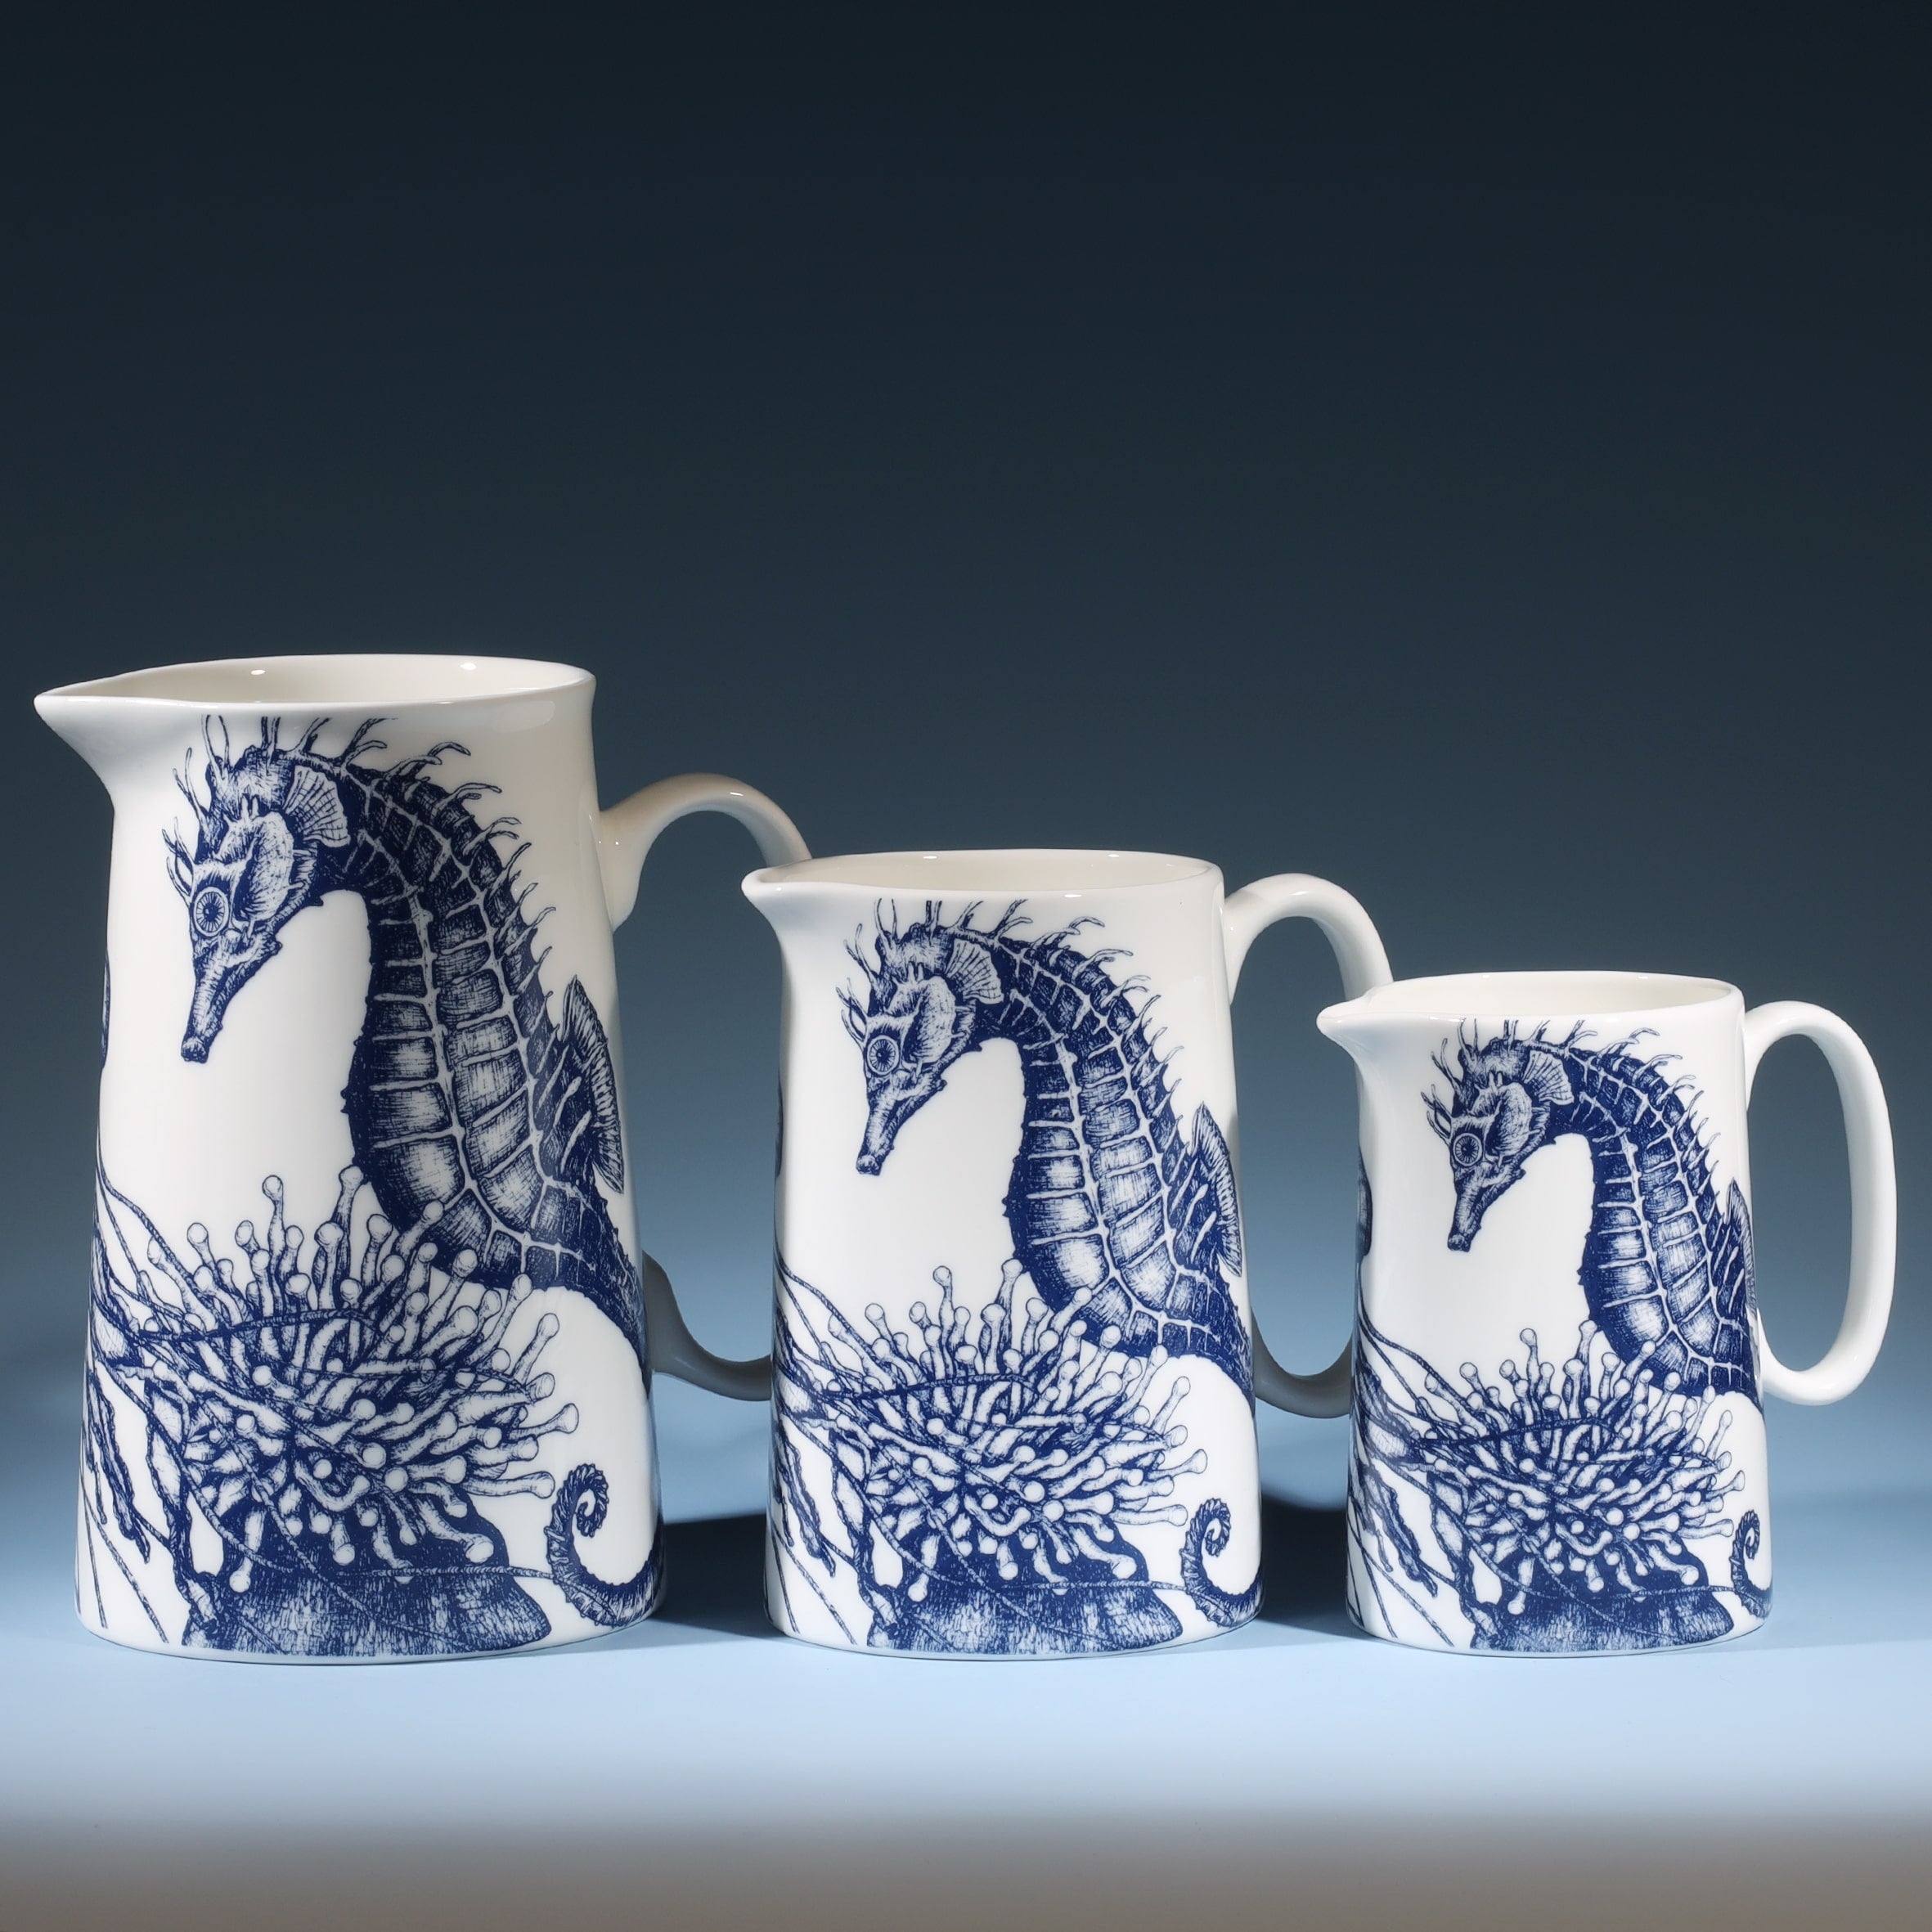 Three Bone China white Jugs with hand drawn illustration of our Seahorse with Anemone and Jellyfish  in Navy.There are three sizes Large,Medium and small.